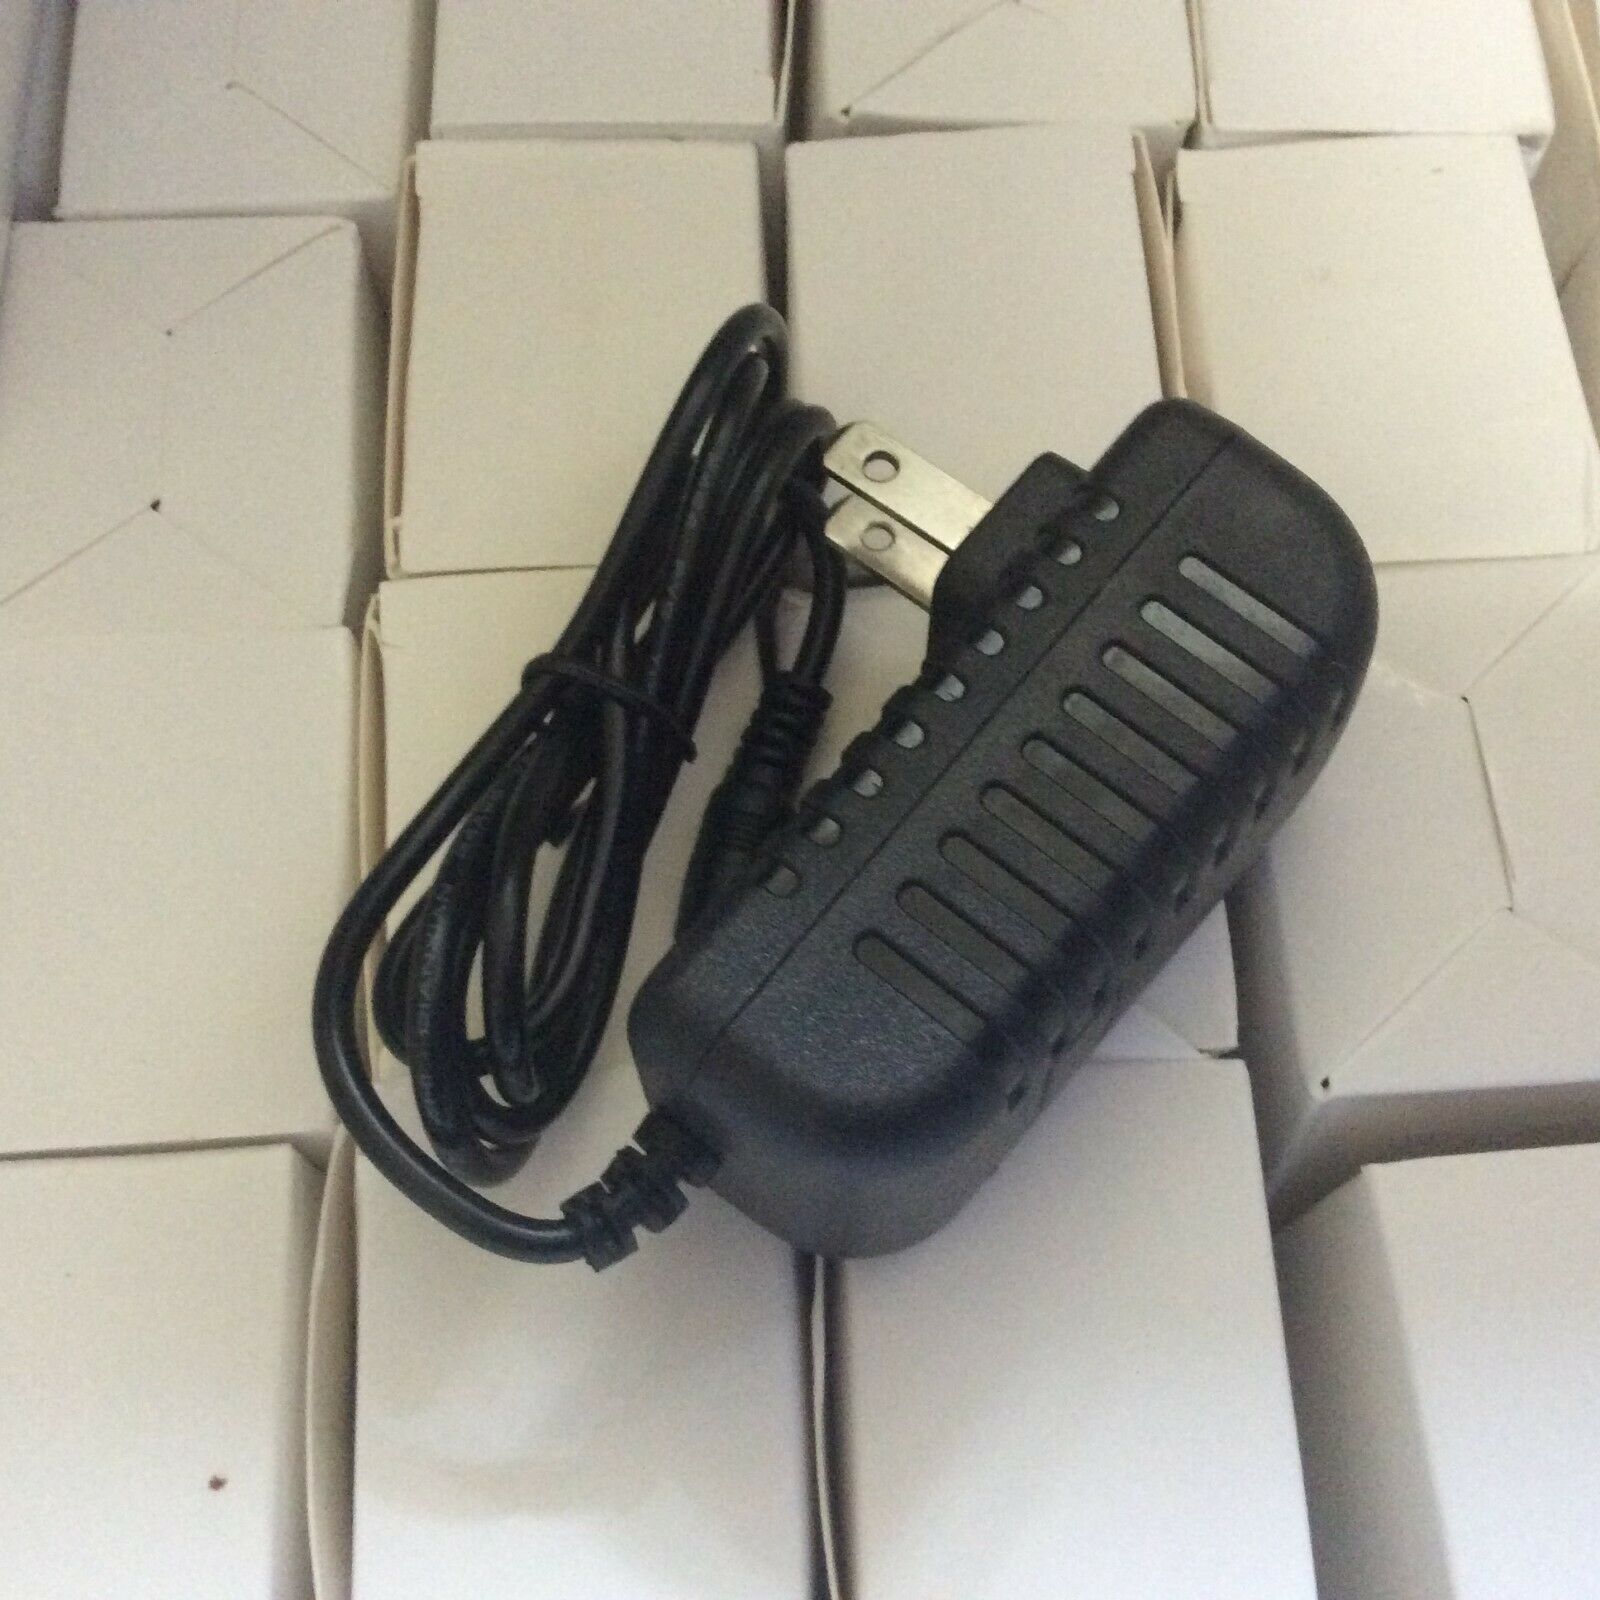 *Brand NEW* Boss PSA-120S 120T Archer Cat. No. 273-1656 9V AC DC Power Adapter Charger - Click Image to Close